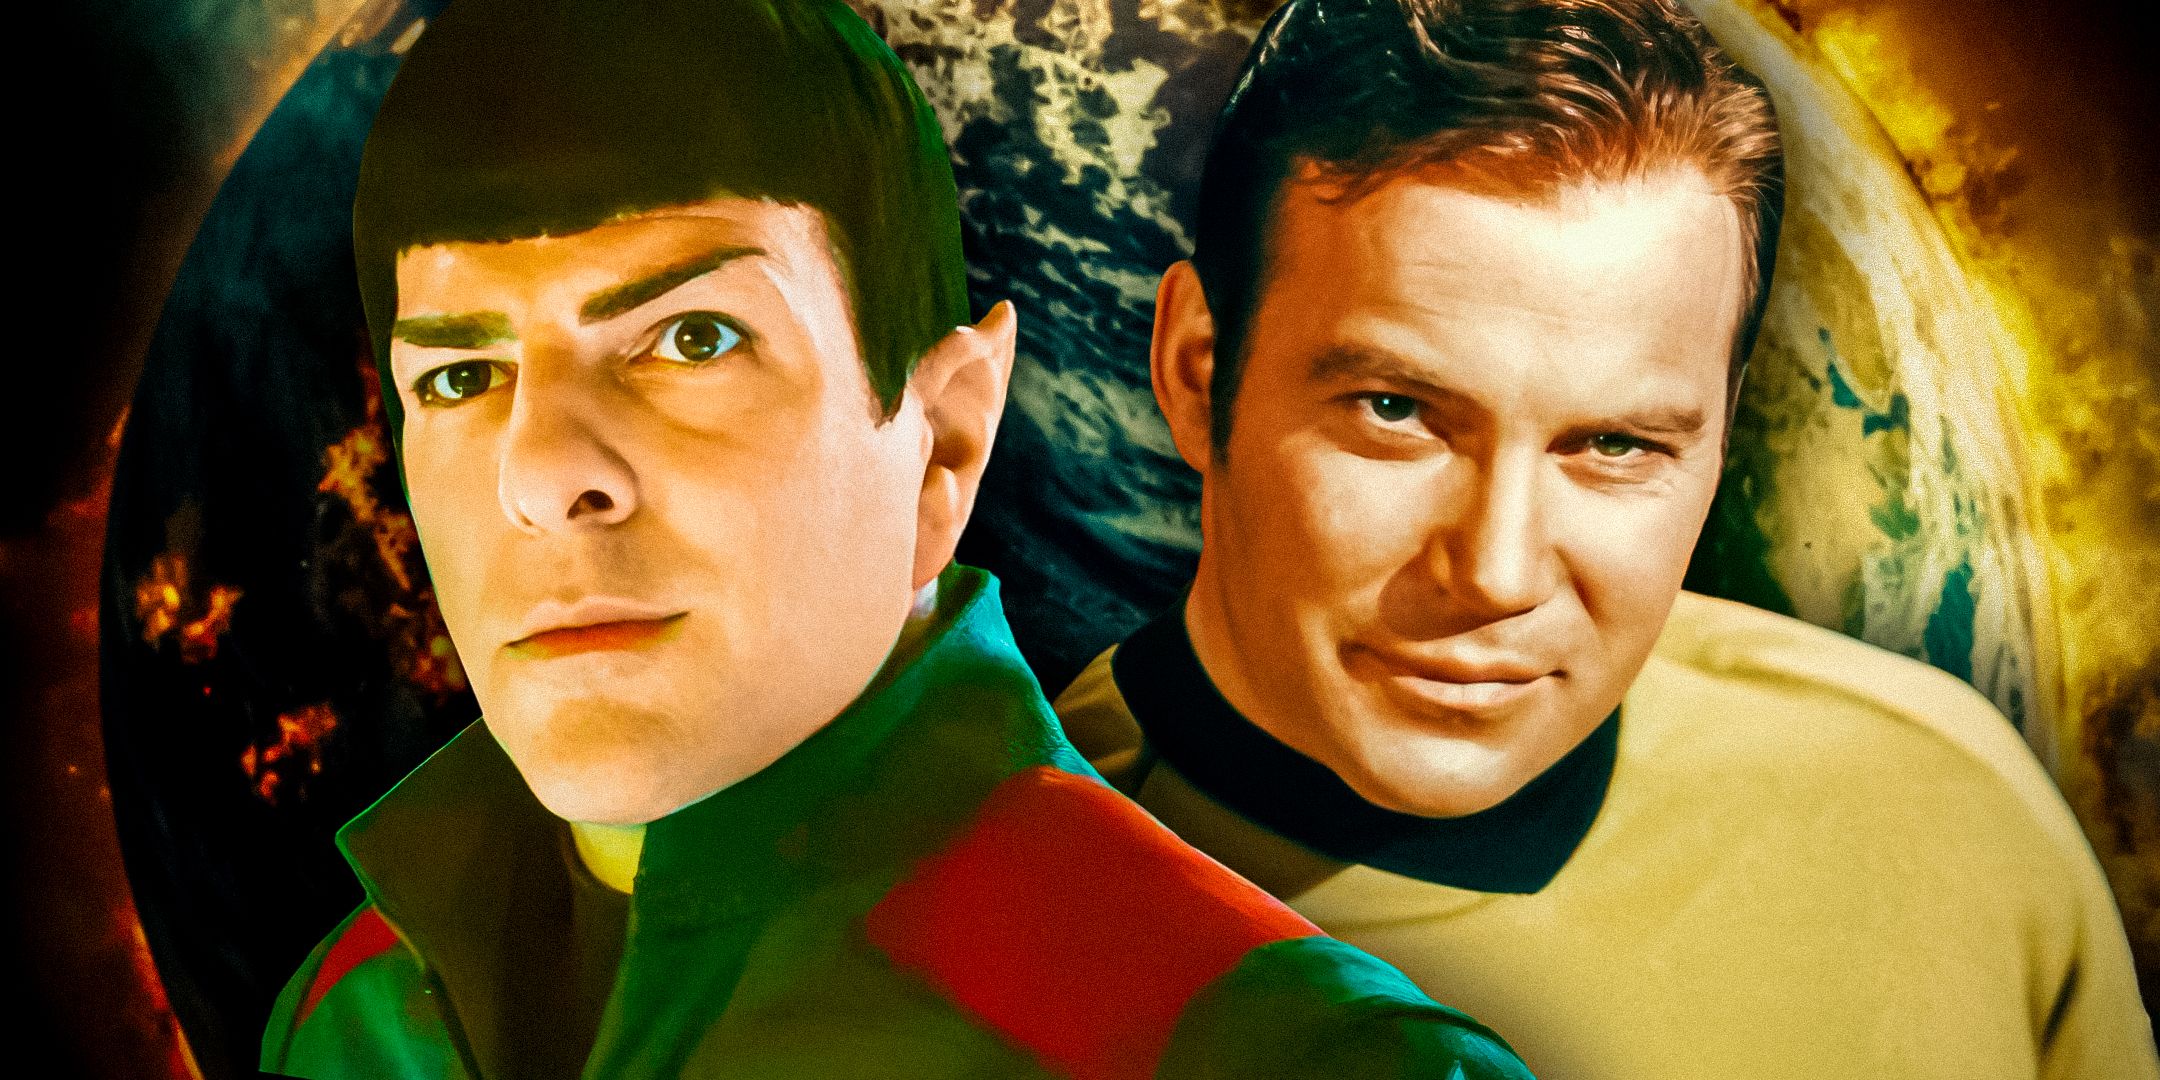 Spock in JJ Abrams and Kirk in TOS